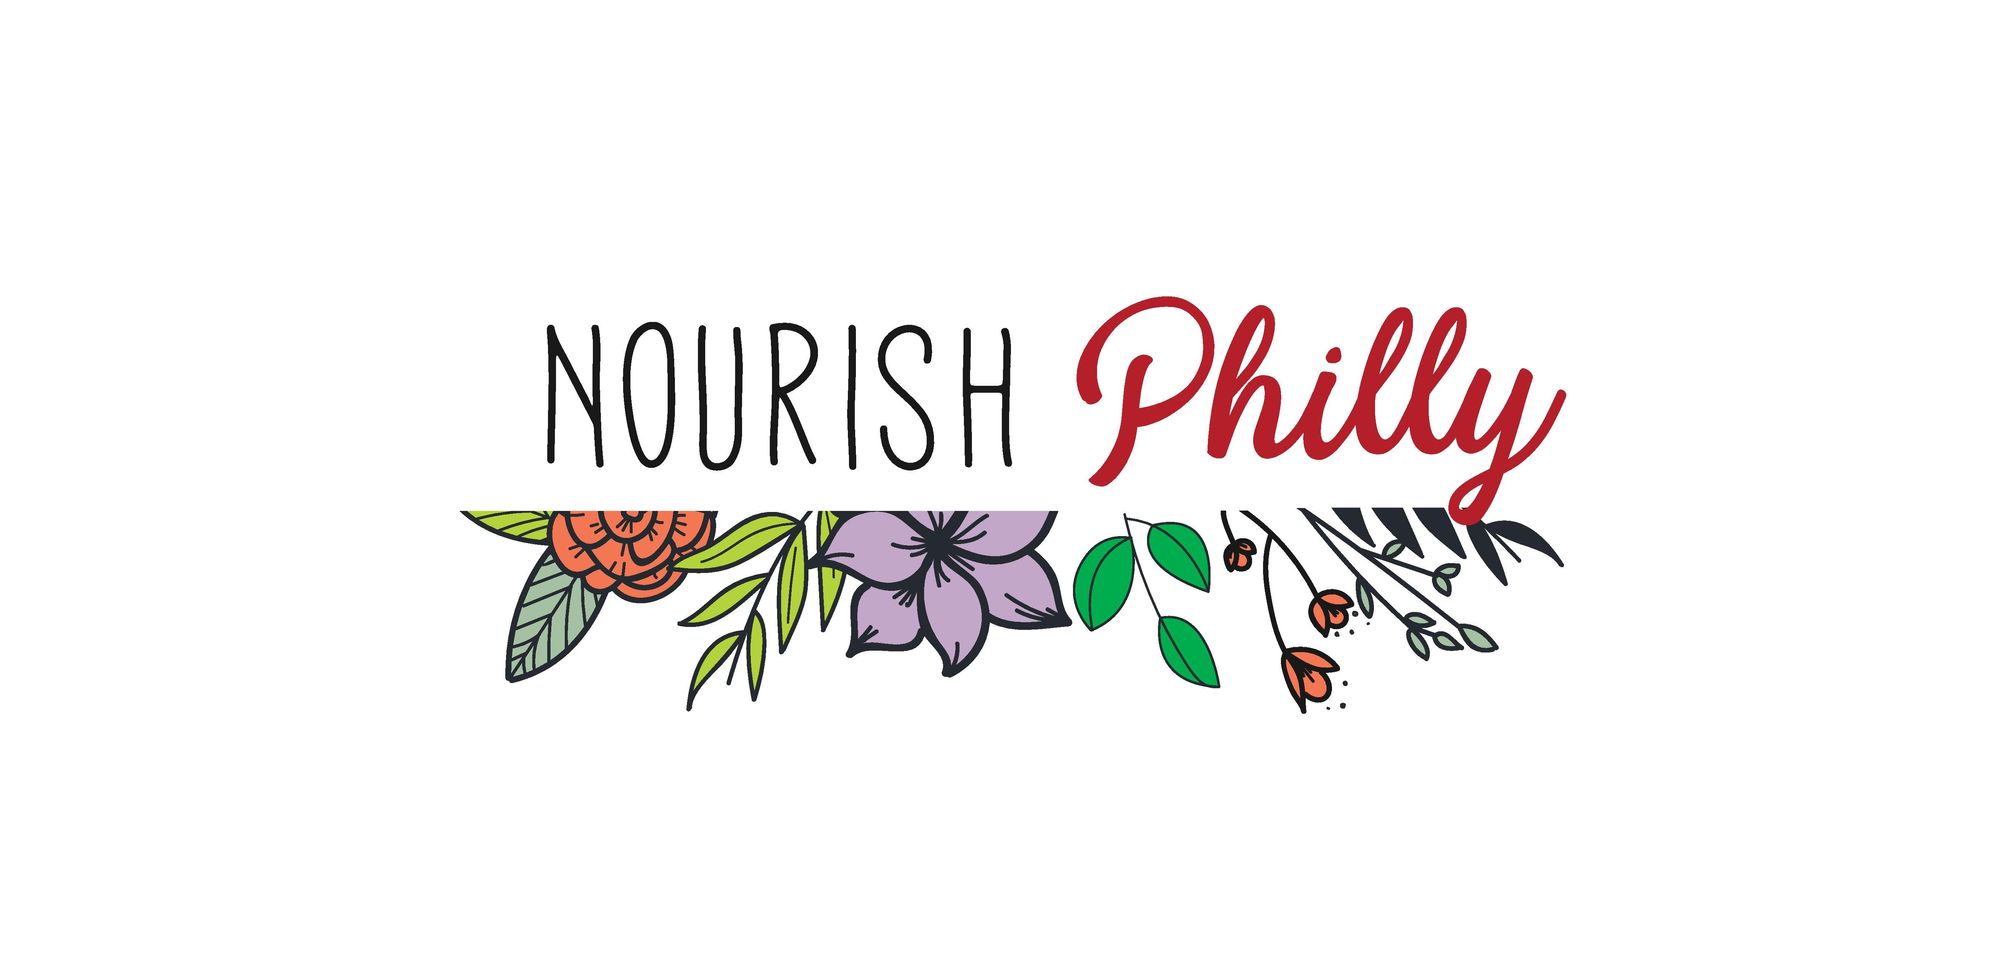 Nourish Your Body One Meal at a Time - Nourish Philly